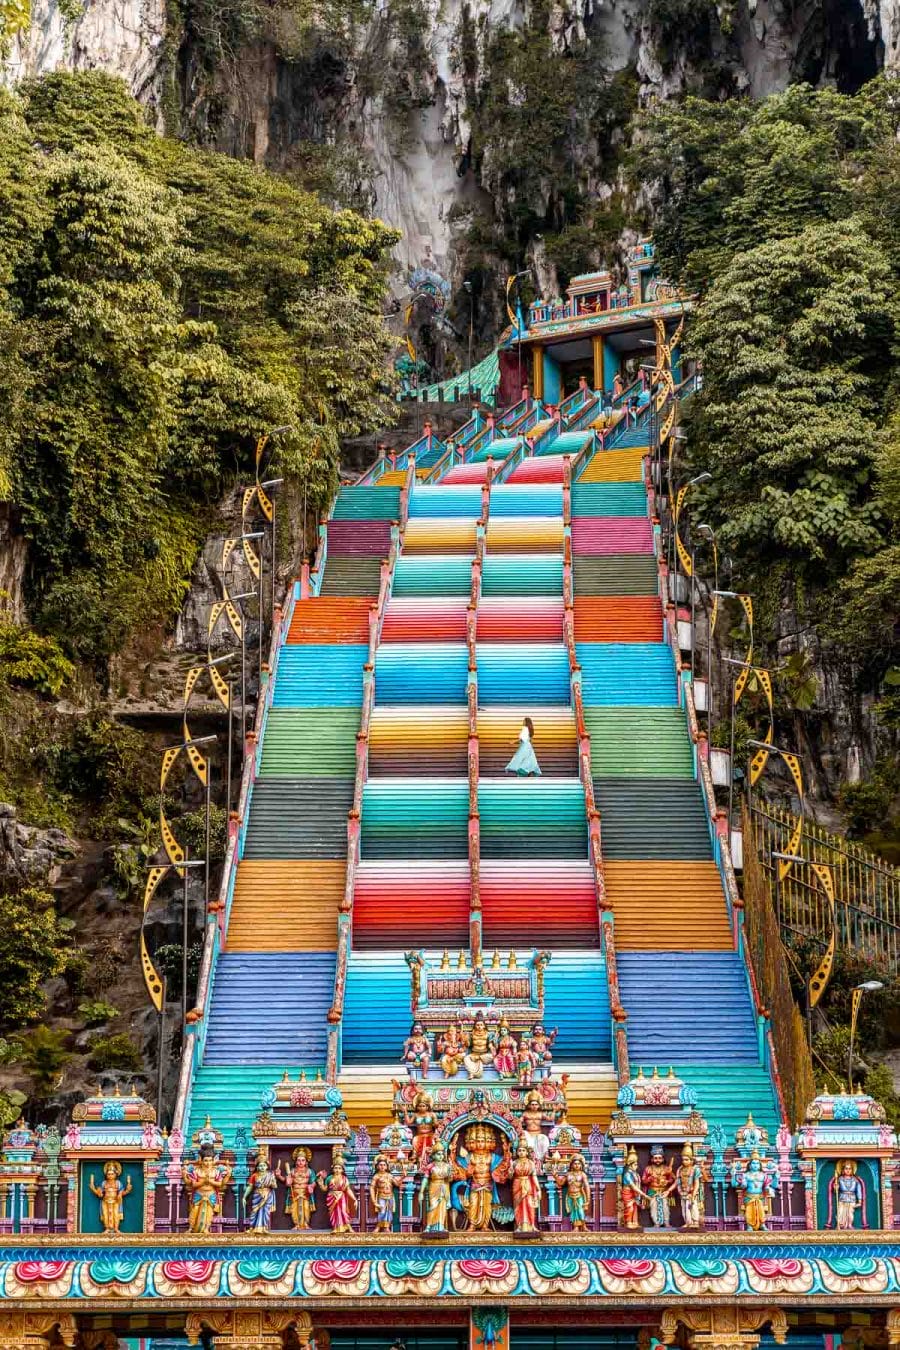 Girl in a blue dress standing on the colorful stairs at Batu Caves, Kuala Lumpur